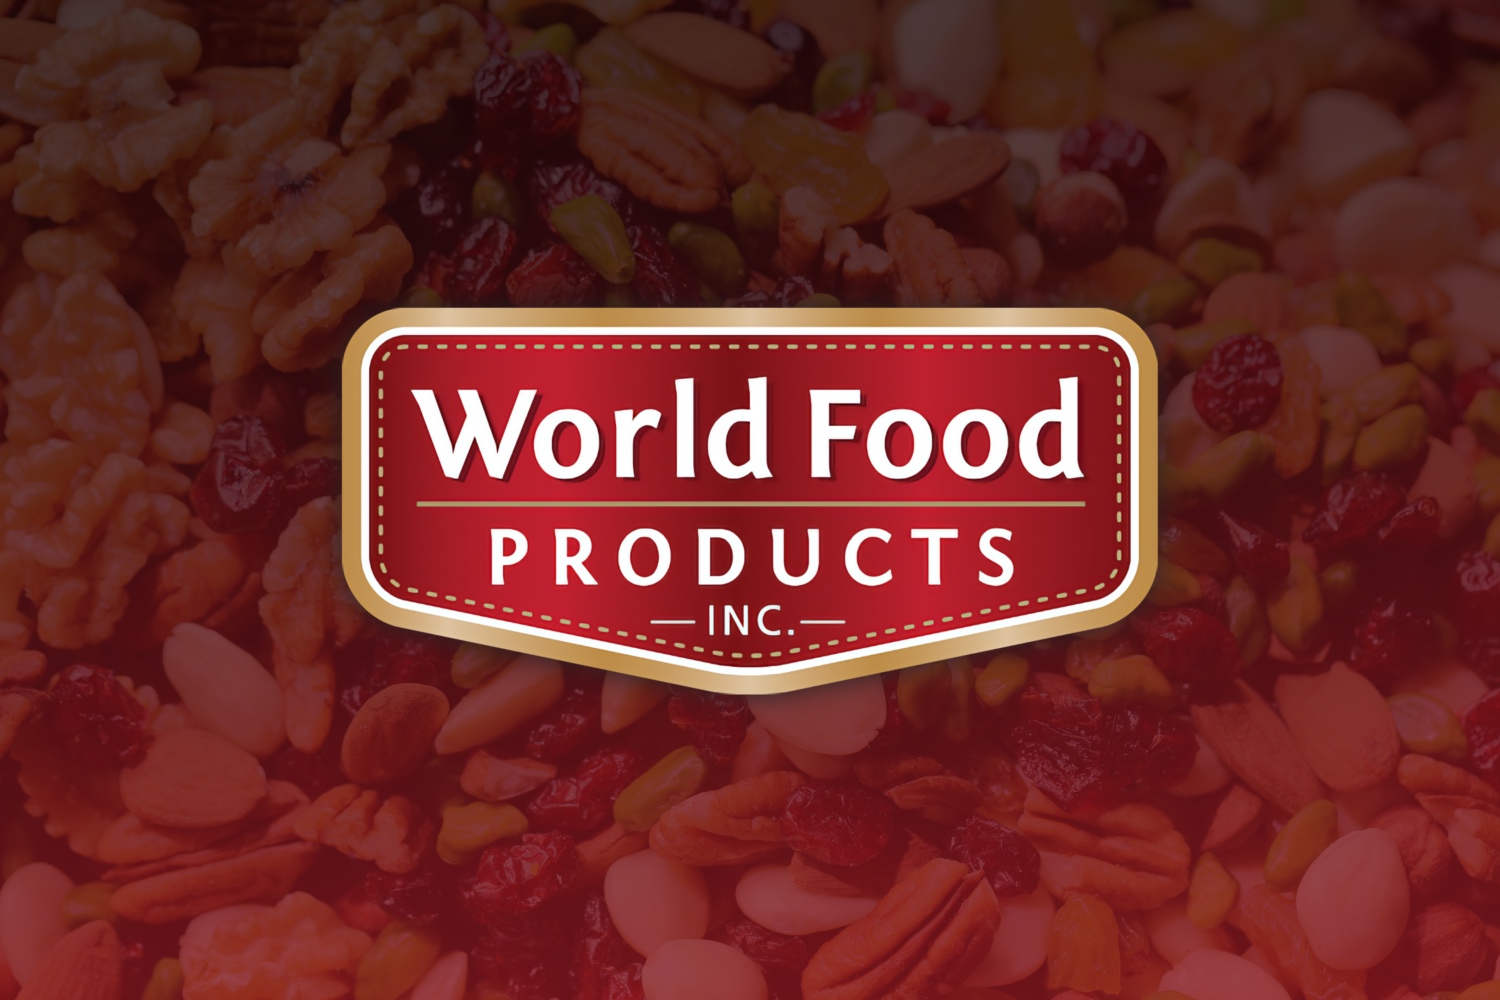 https://worldfoodproducts.com/wp-content/uploads/2022/03/WFP_header.jpg